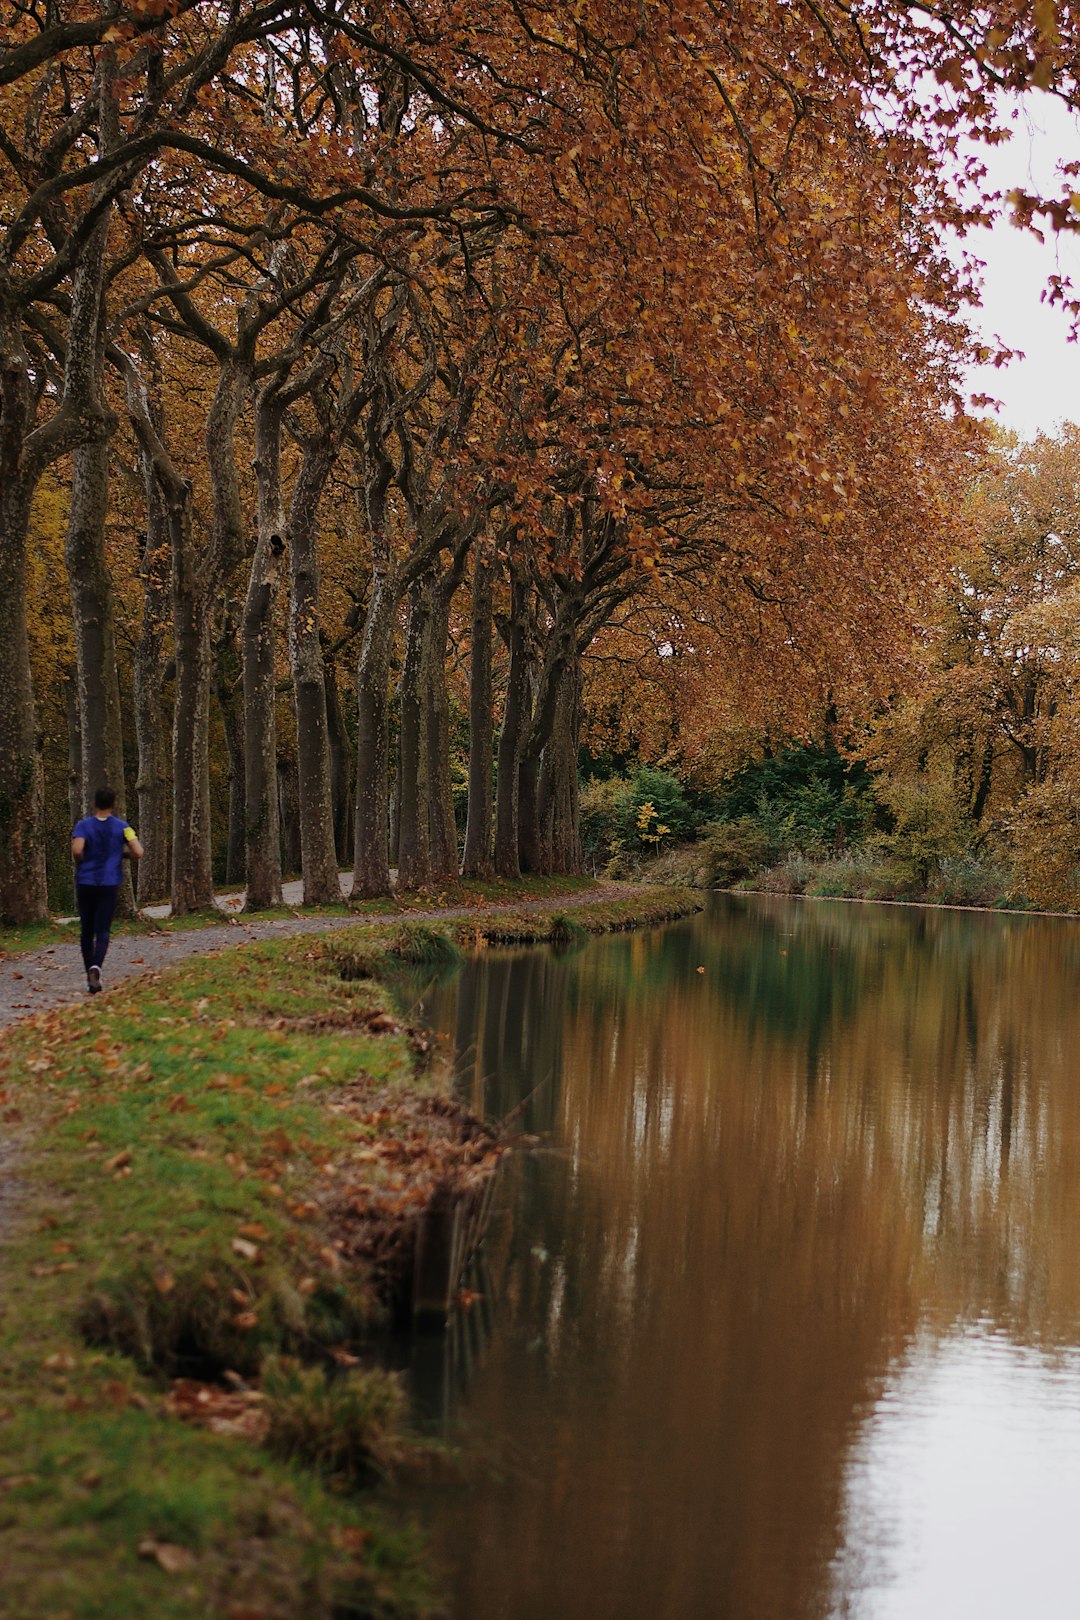 person in blue jacket walking on pathway near river during daytime